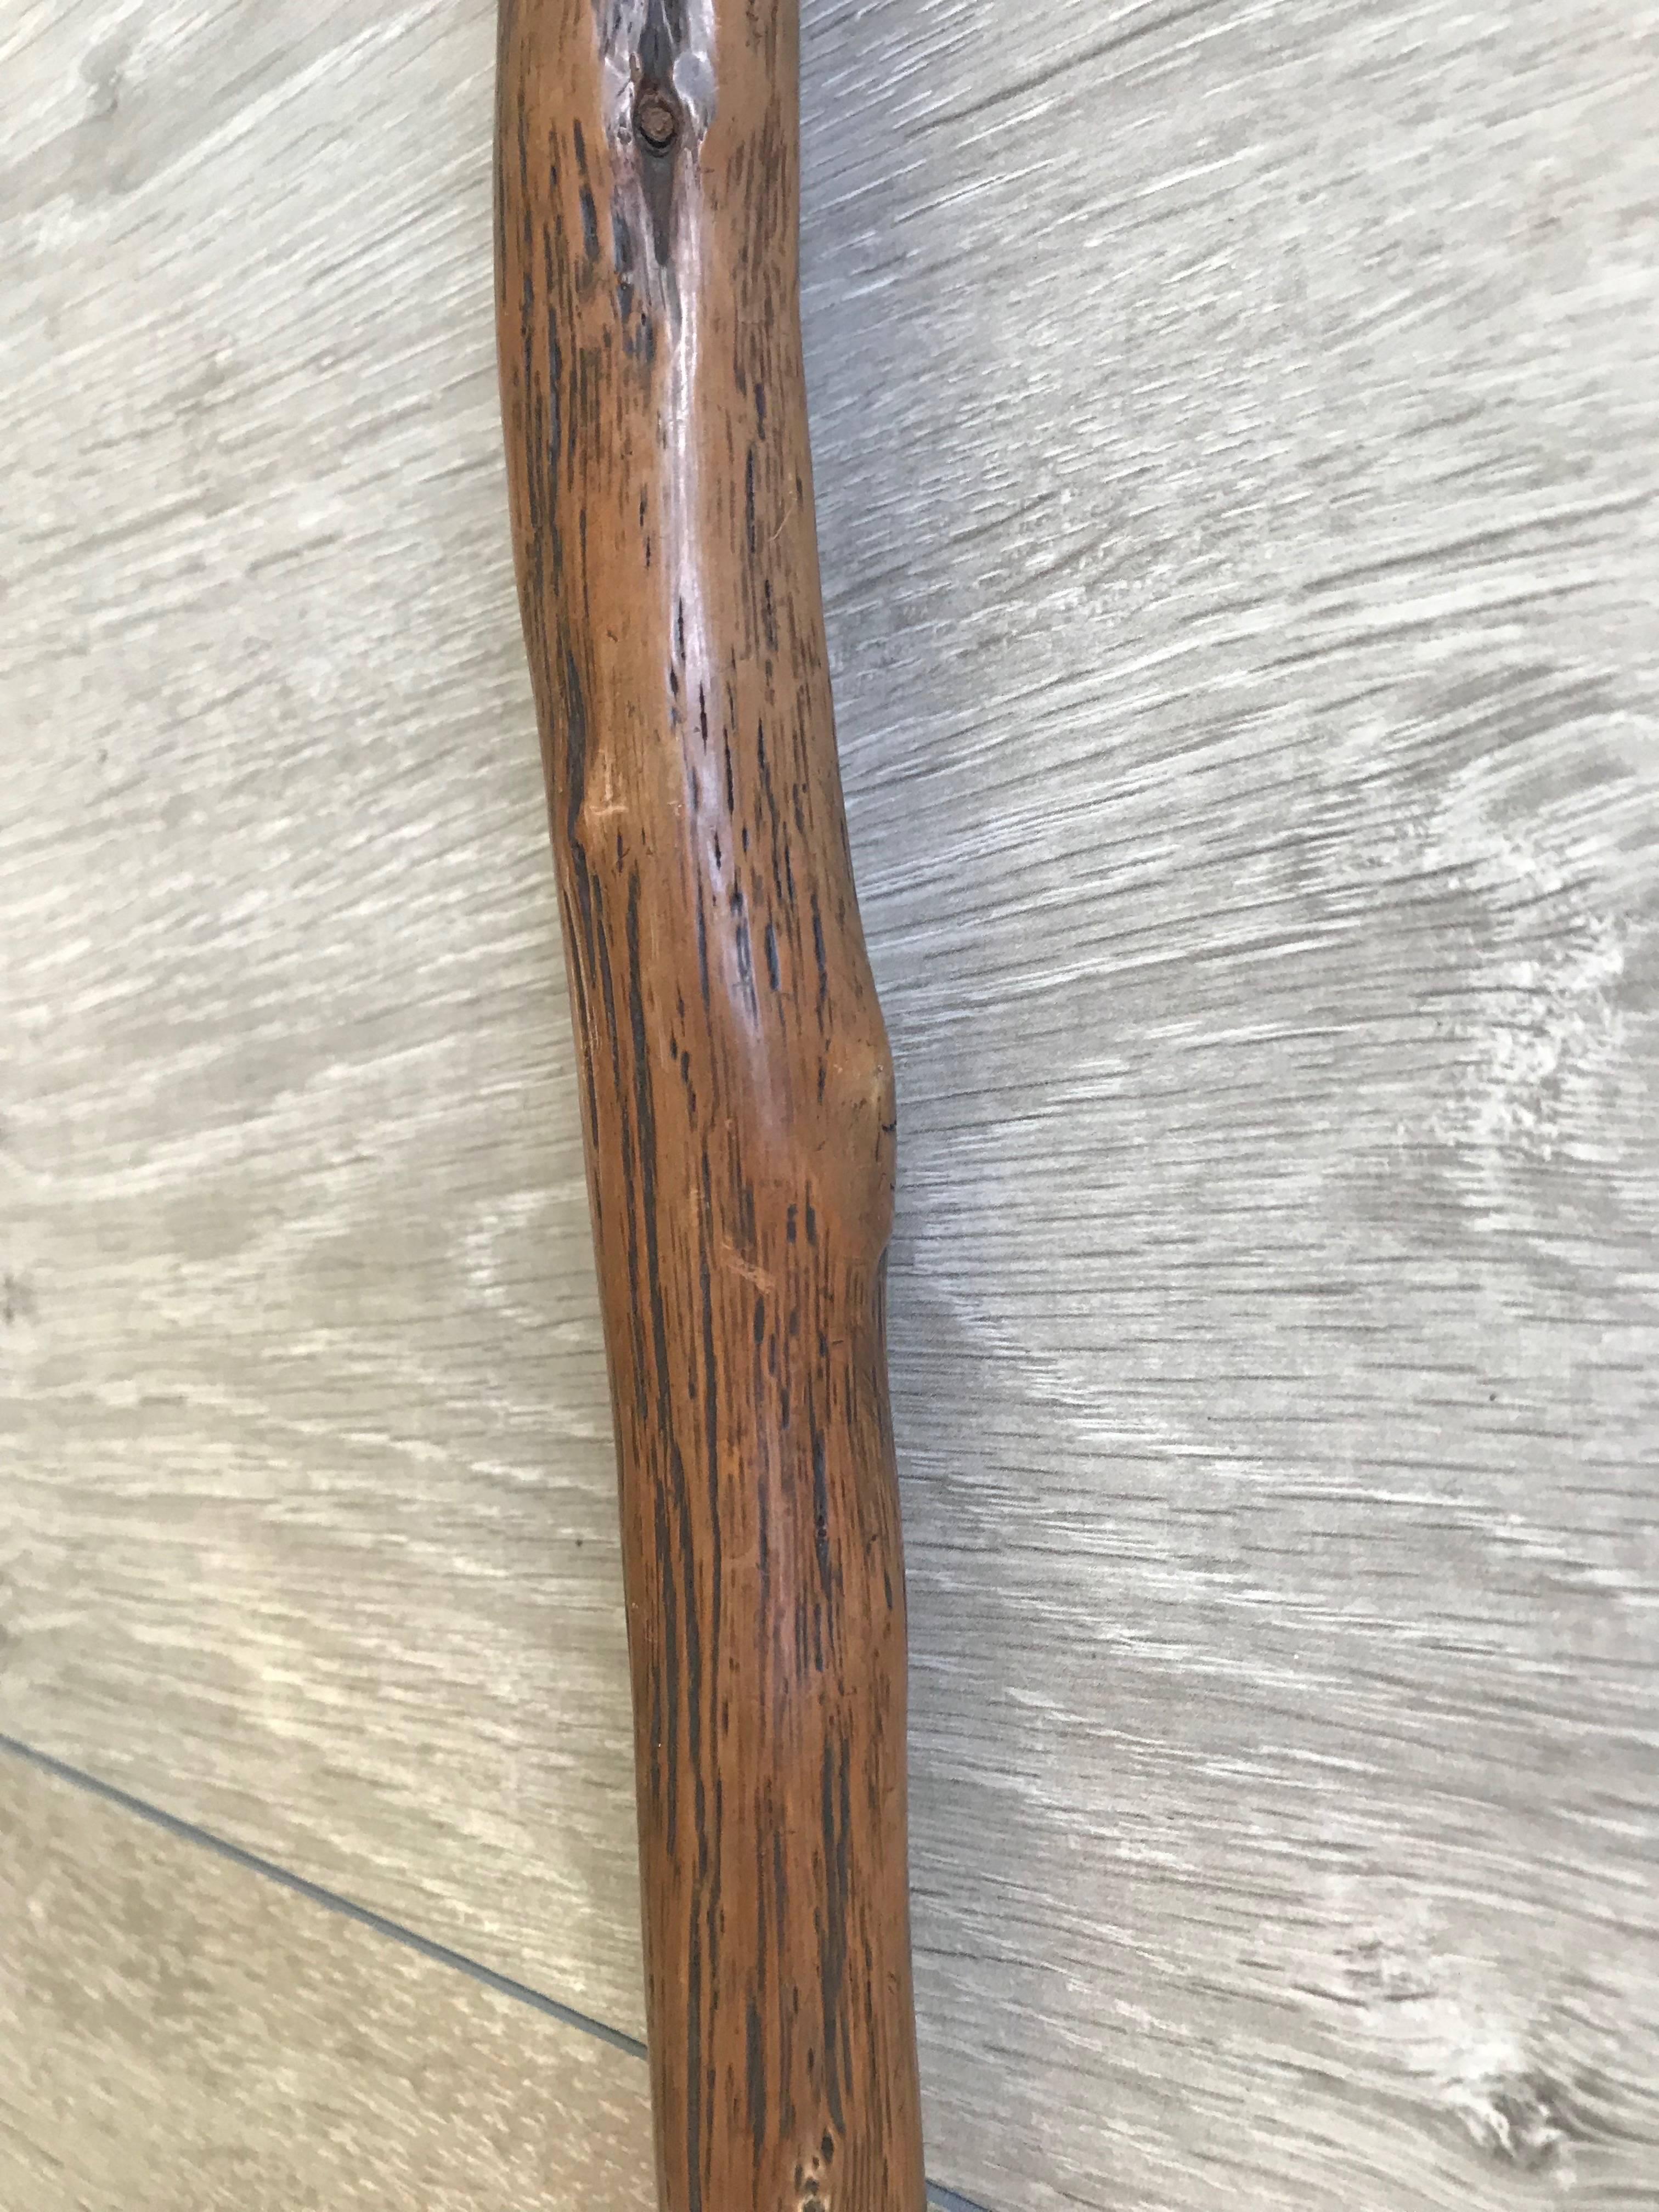 Black Forest Antique and Strong Real Branch Wood Walking Stick or Cane